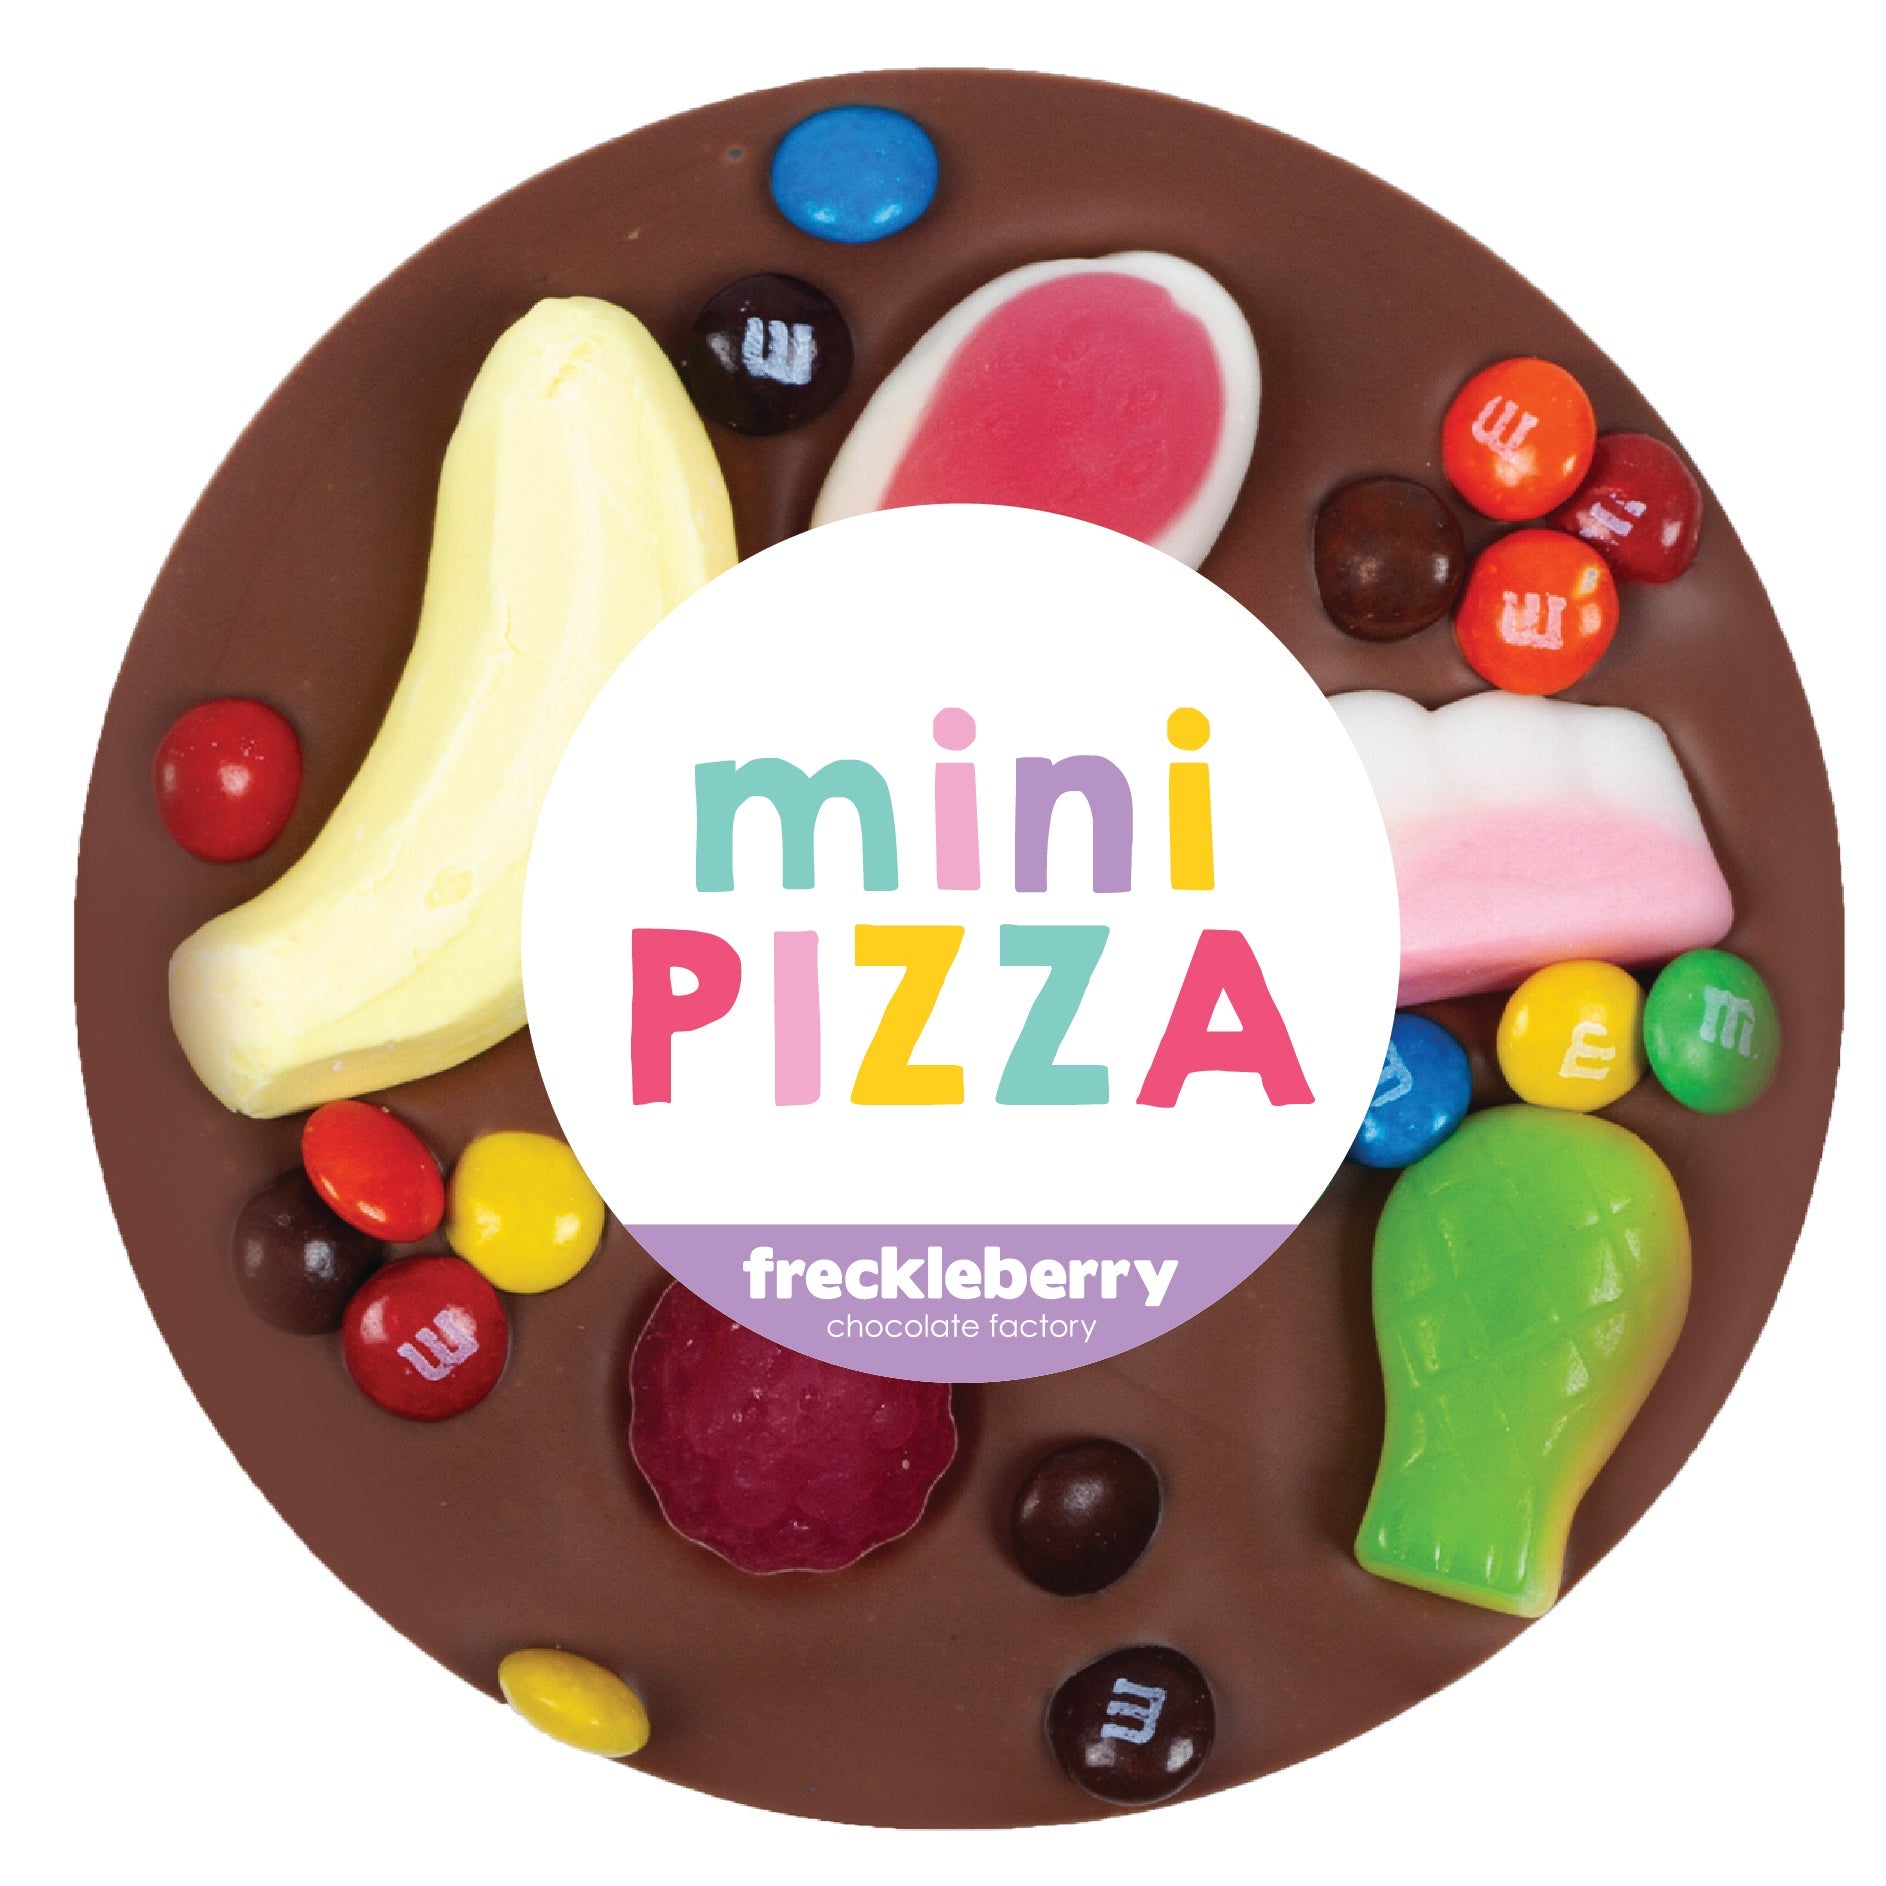 Freckleberry Chocolate Factory - Mini Lolly Pizza